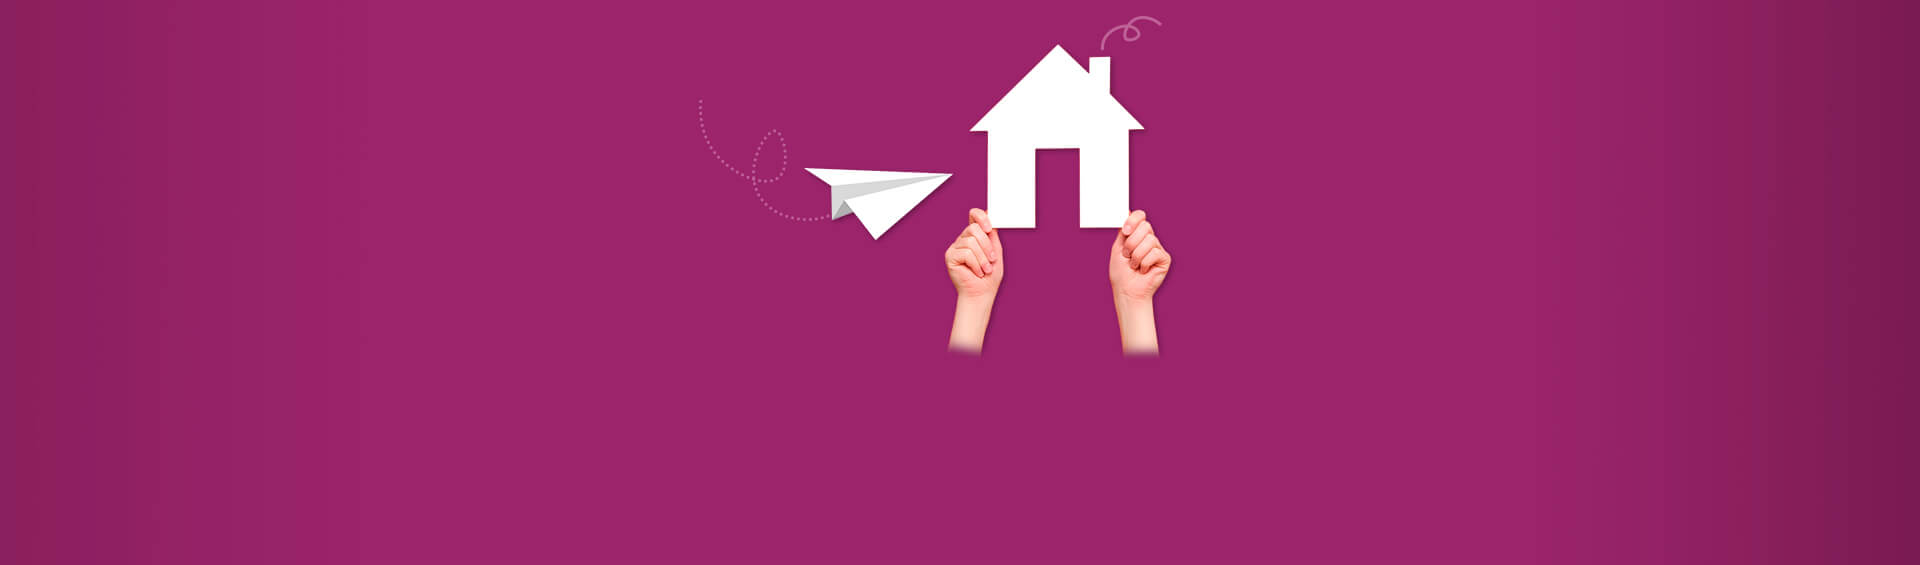 How To Email a Real Estate Agent: Tips and Examples